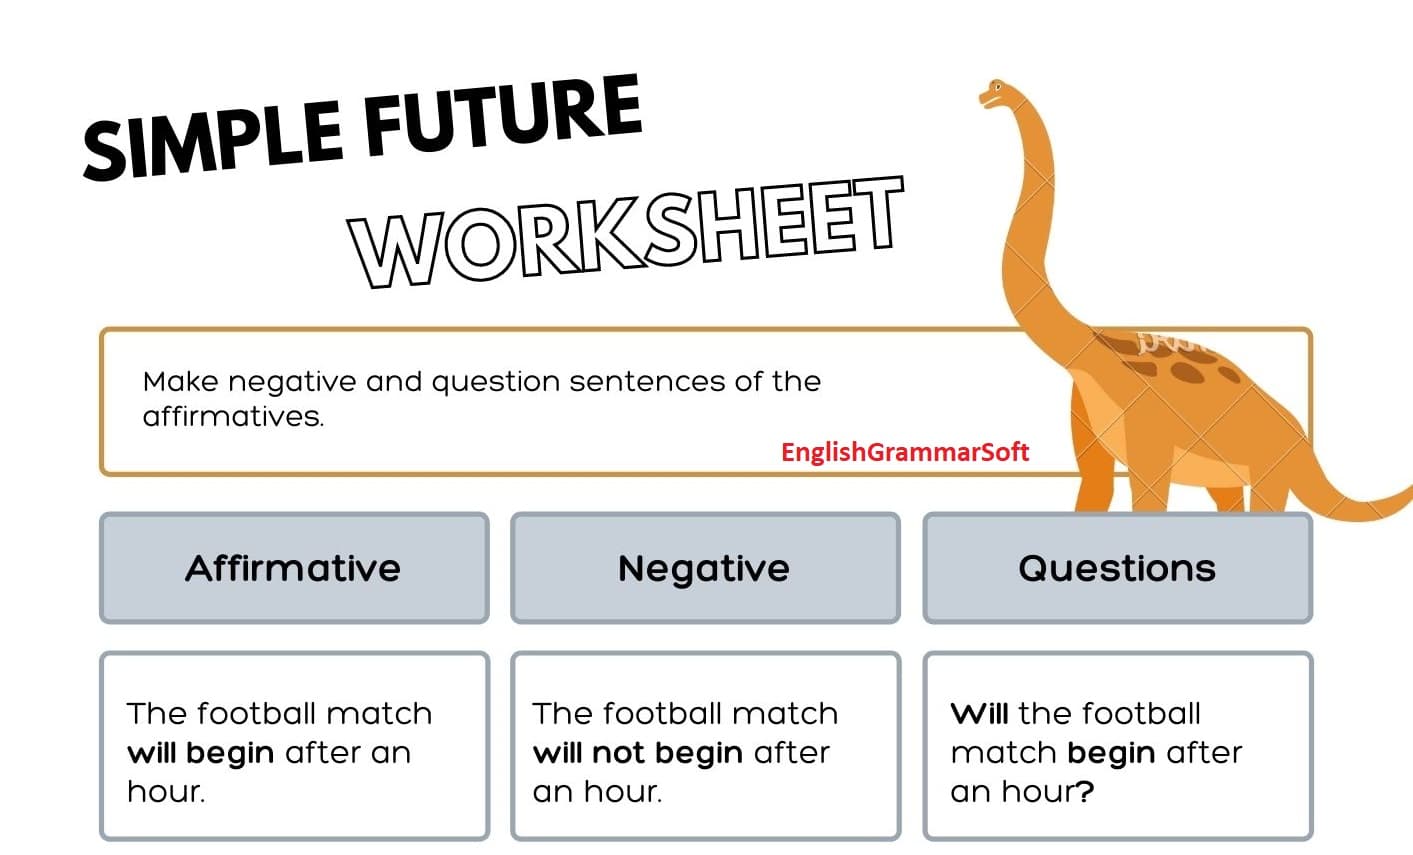 Simple Future Tense Worksheets With Answers EnglishGrammarSoft